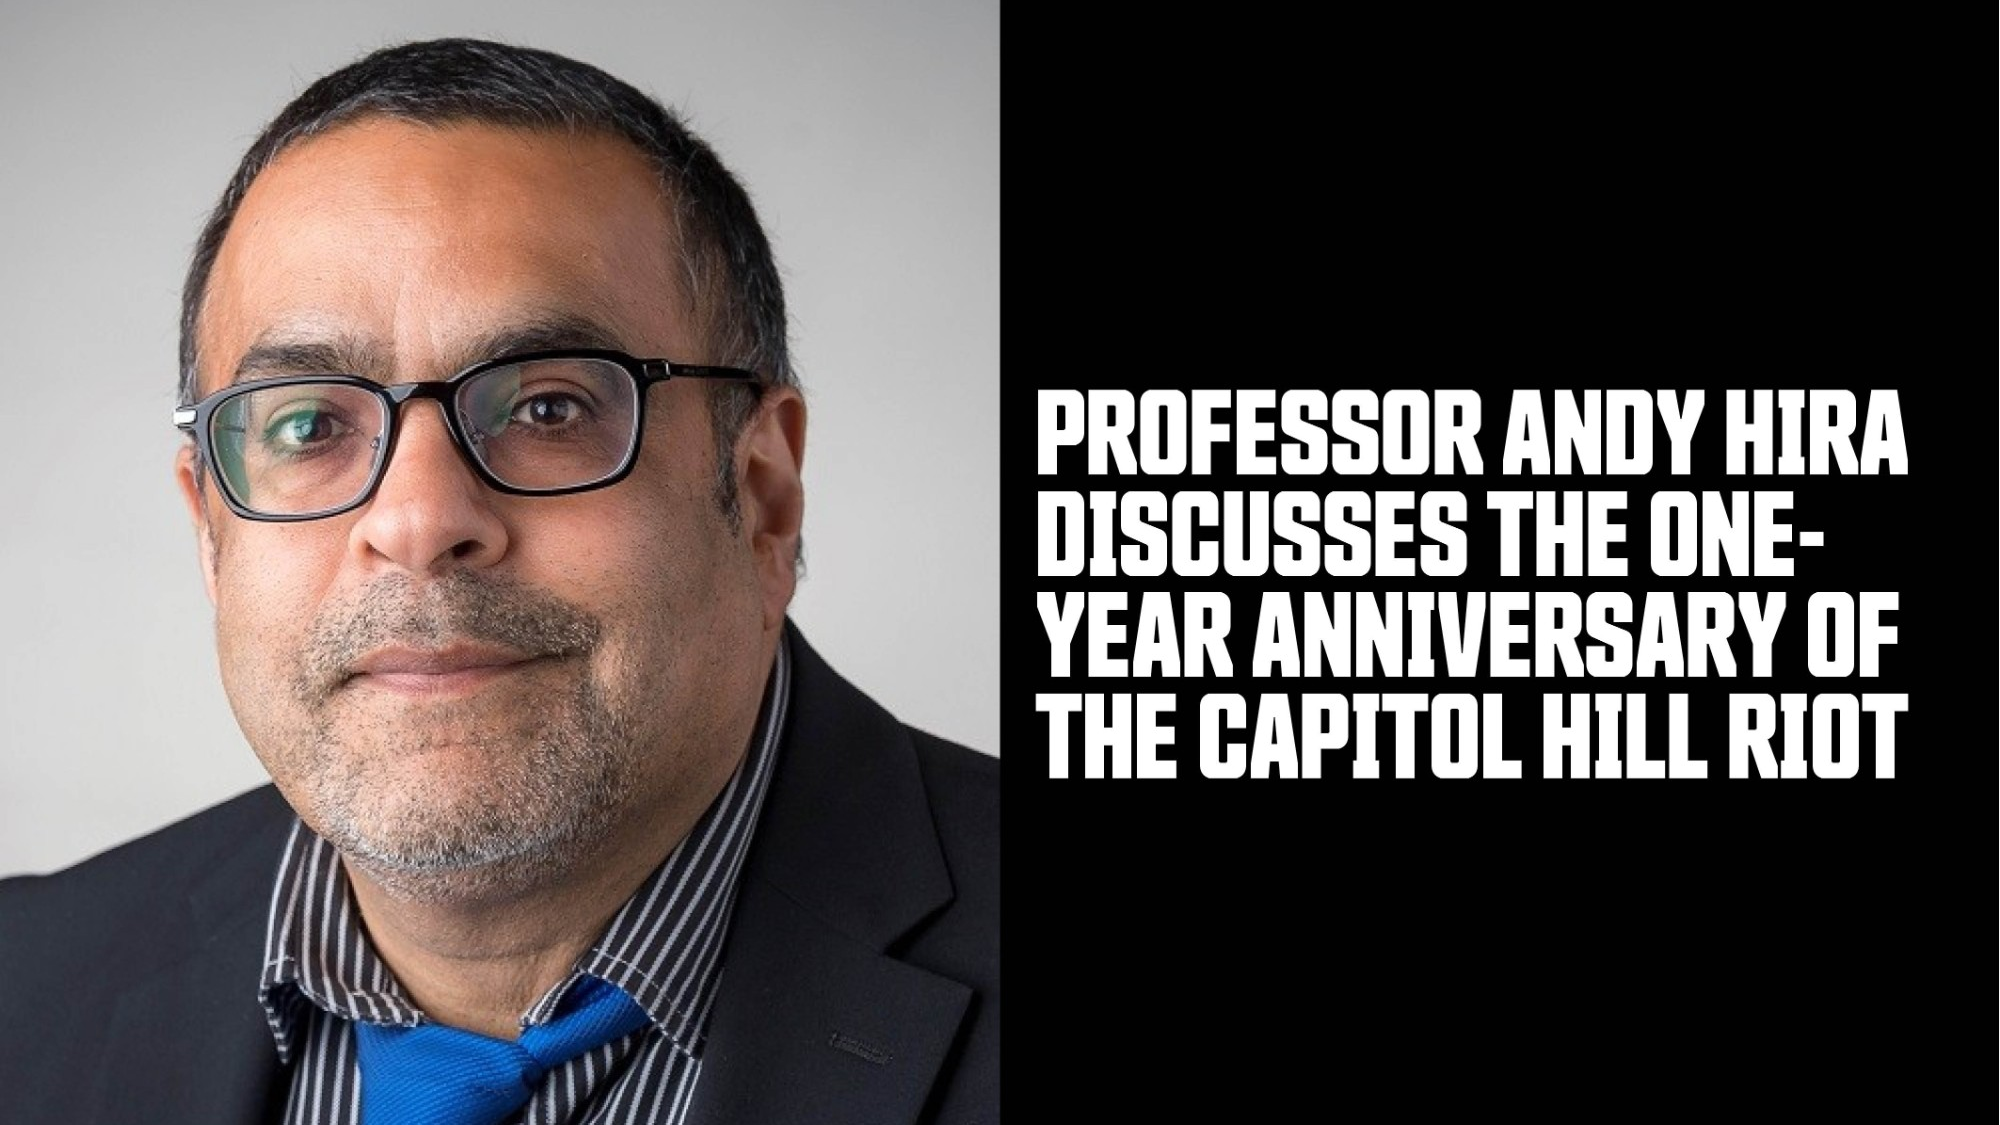 Professor Andy Hira discusses the one-year anniversary of the Capitol Hill riot 